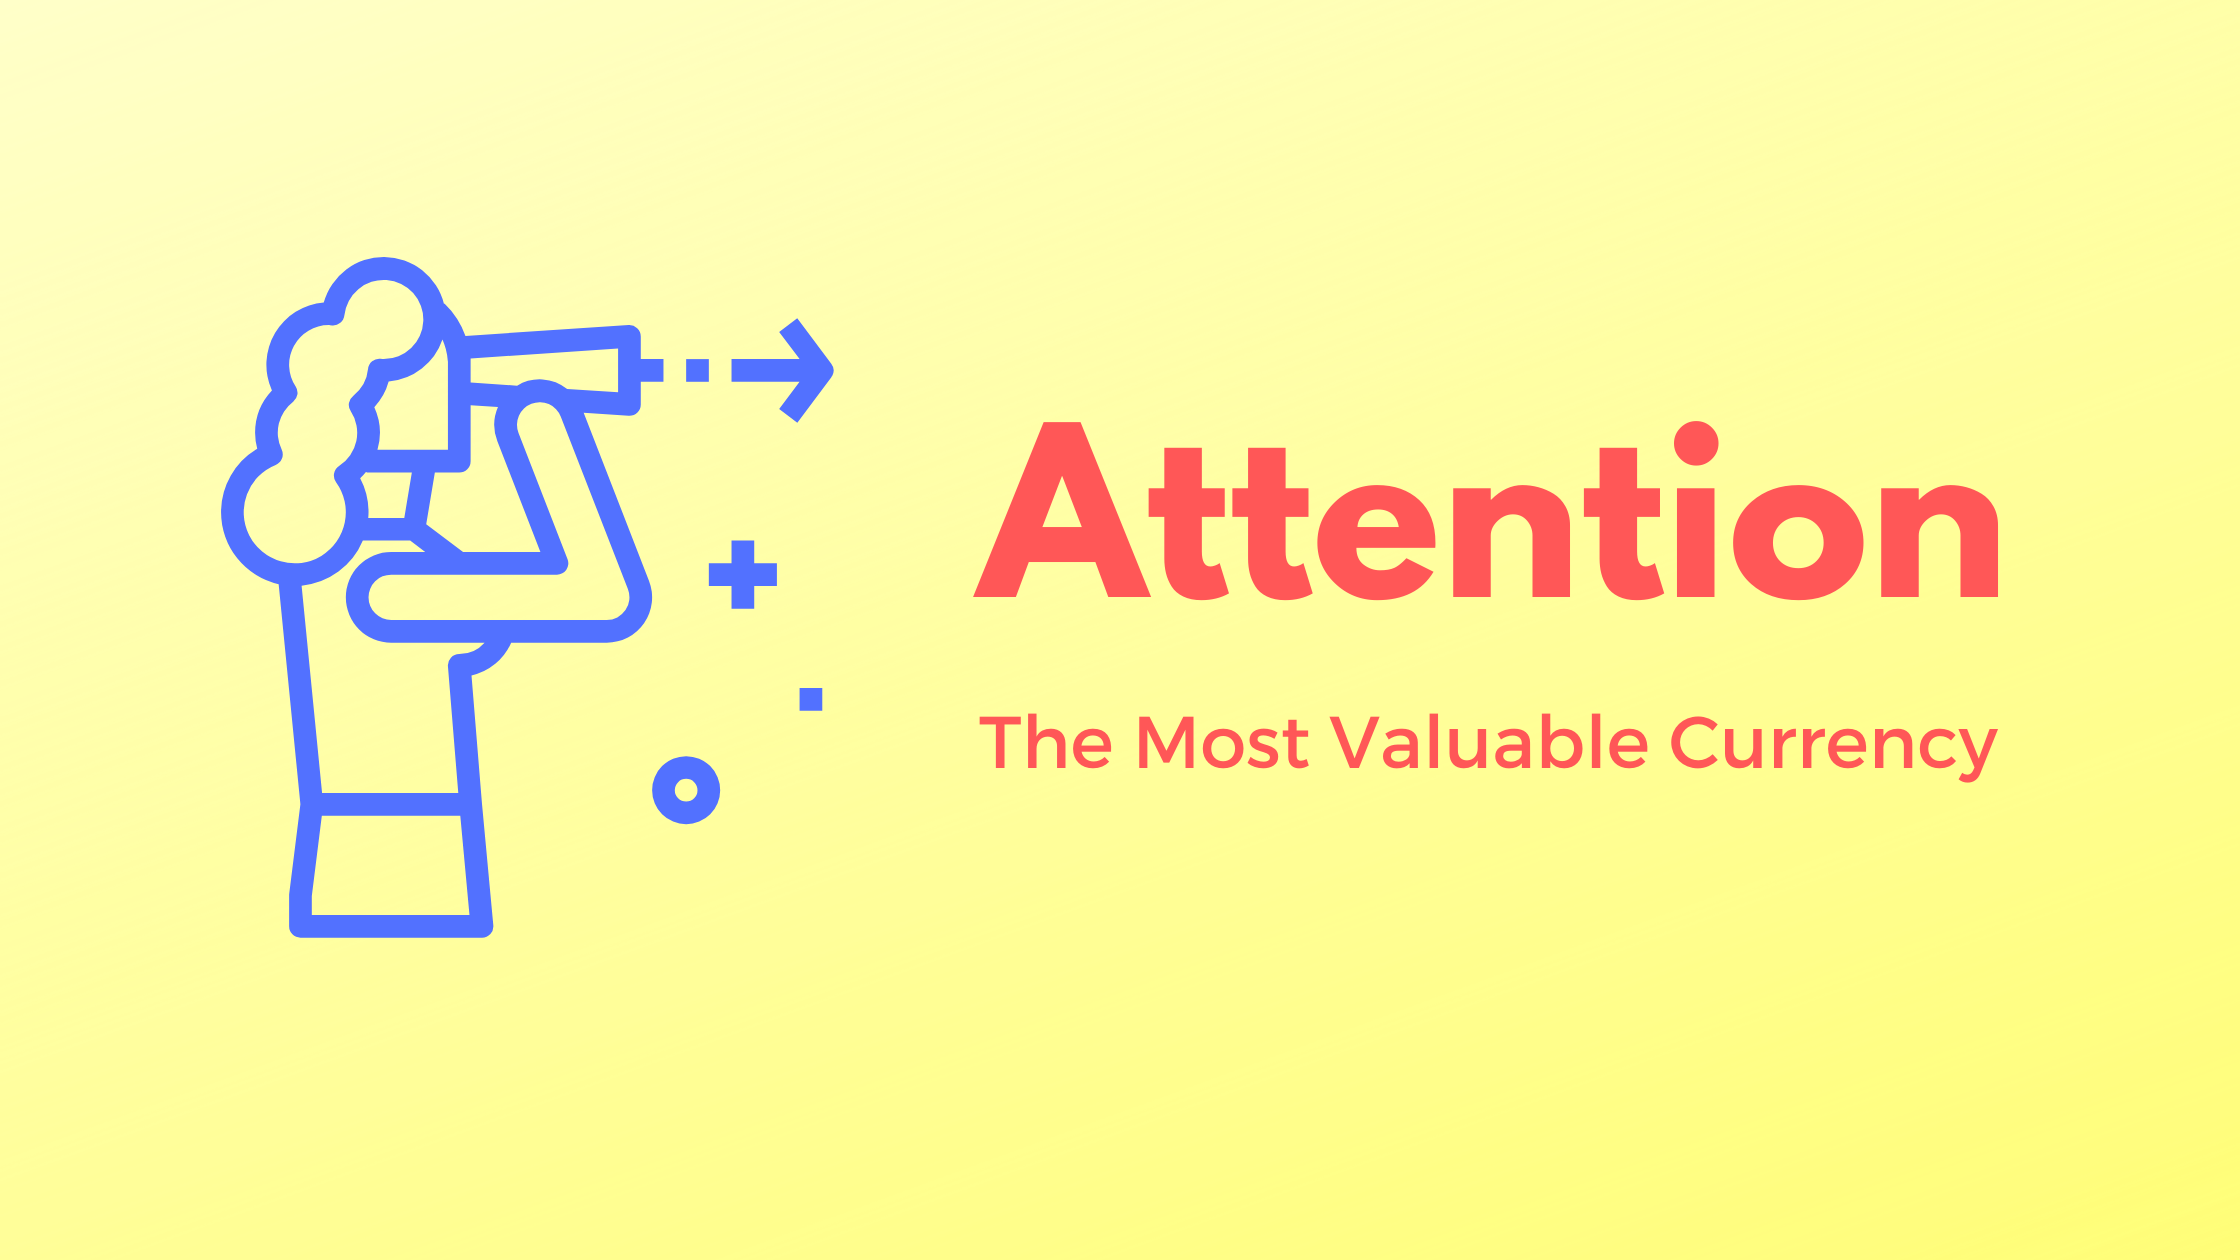 Attention - The Most Valuable Currency